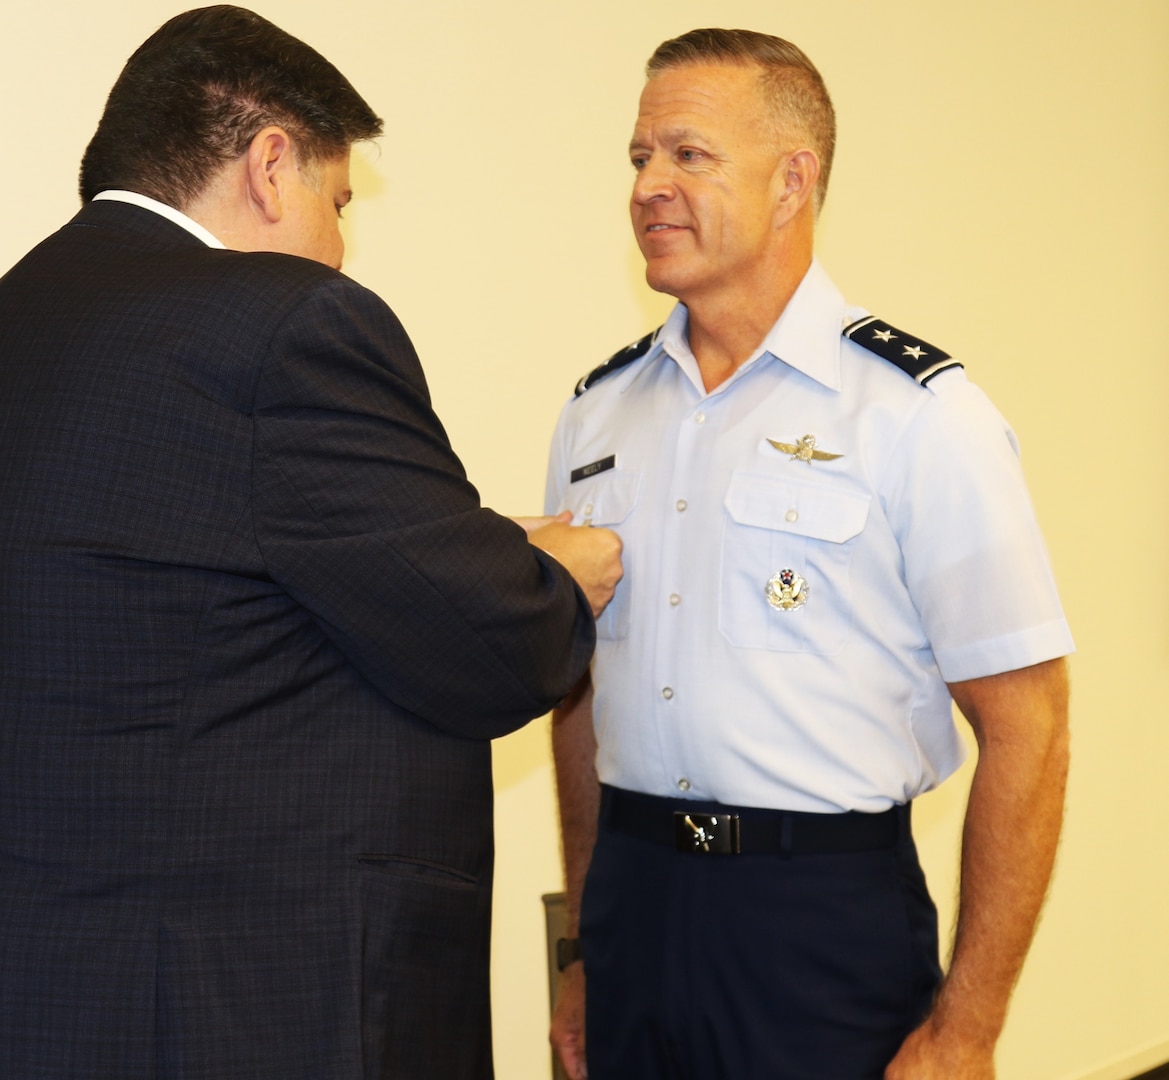 Illinois Governor JB Pritzker awards Maj. Gen. Rich Neely, the Adjutant General of Illinois and the Commander of the Illinois National Guard, with the Illinois Distinguished Service Medal for his "leadership and poise" during the COVID-19 pandemic.